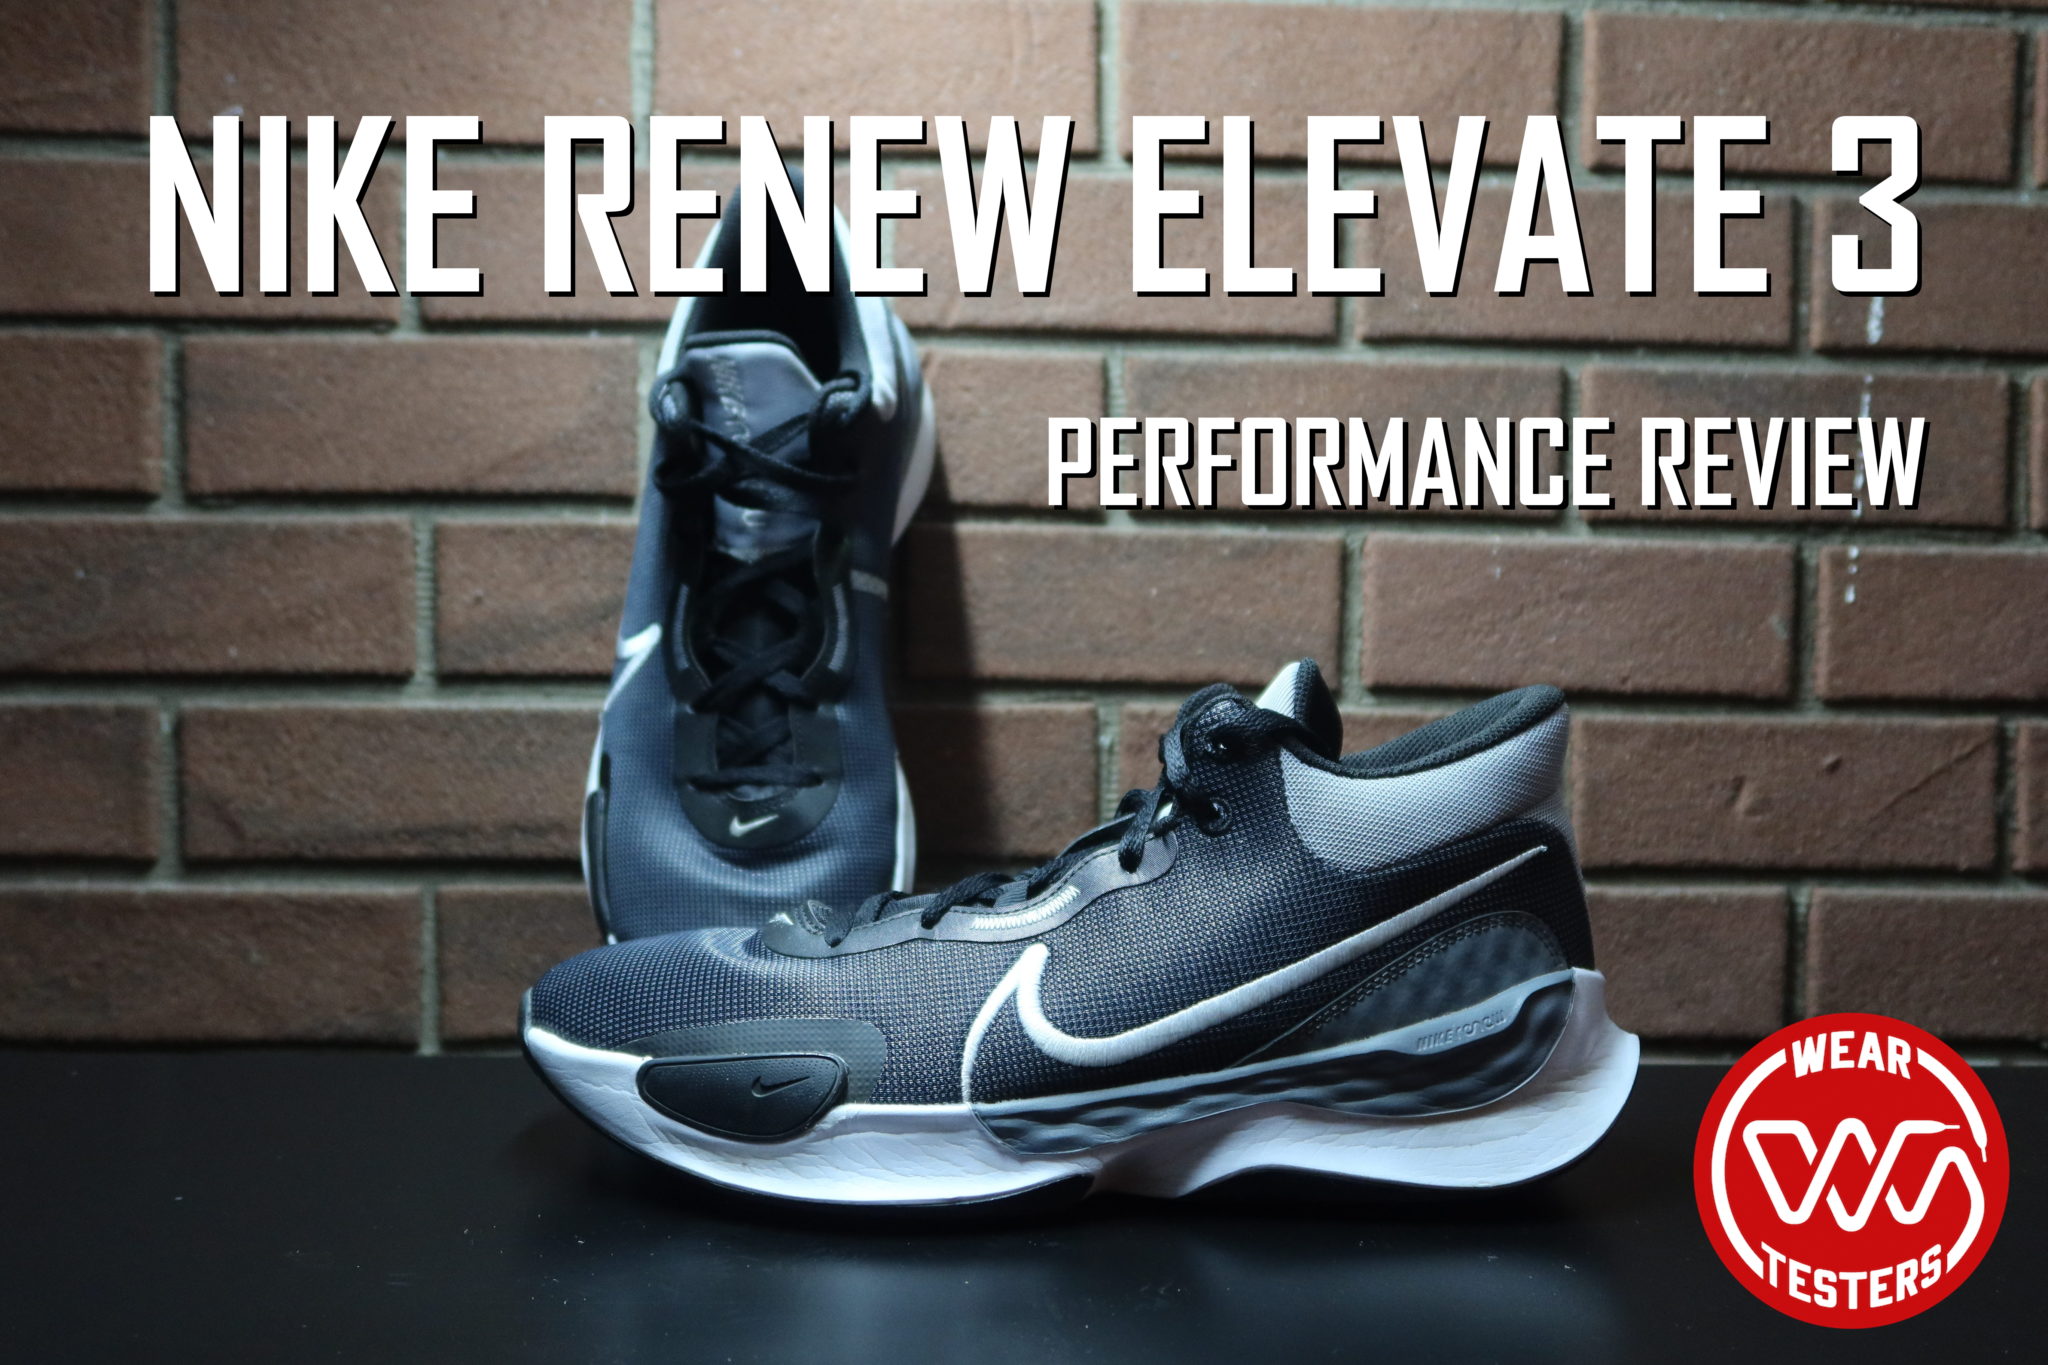 nike renew elevate 3 performance review